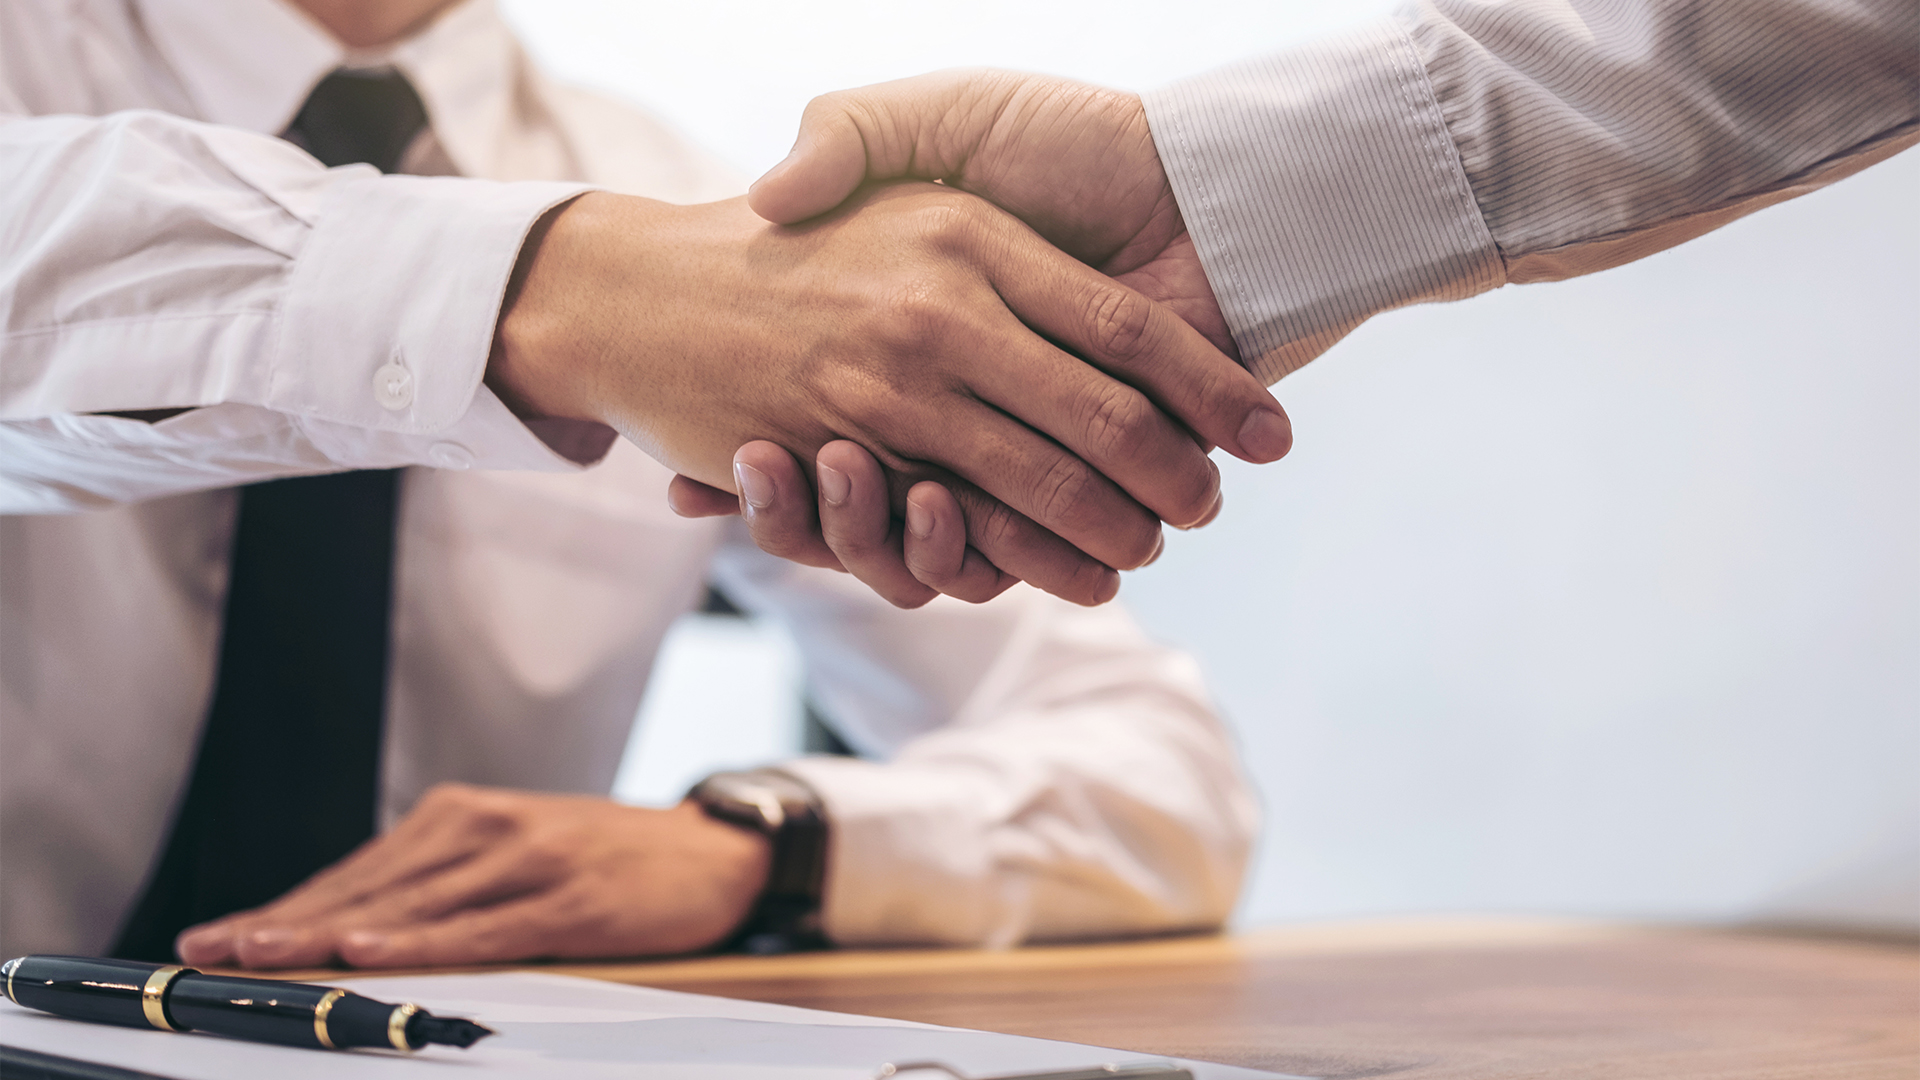 Estate broker agent and customer shaking hands after signing contract documents